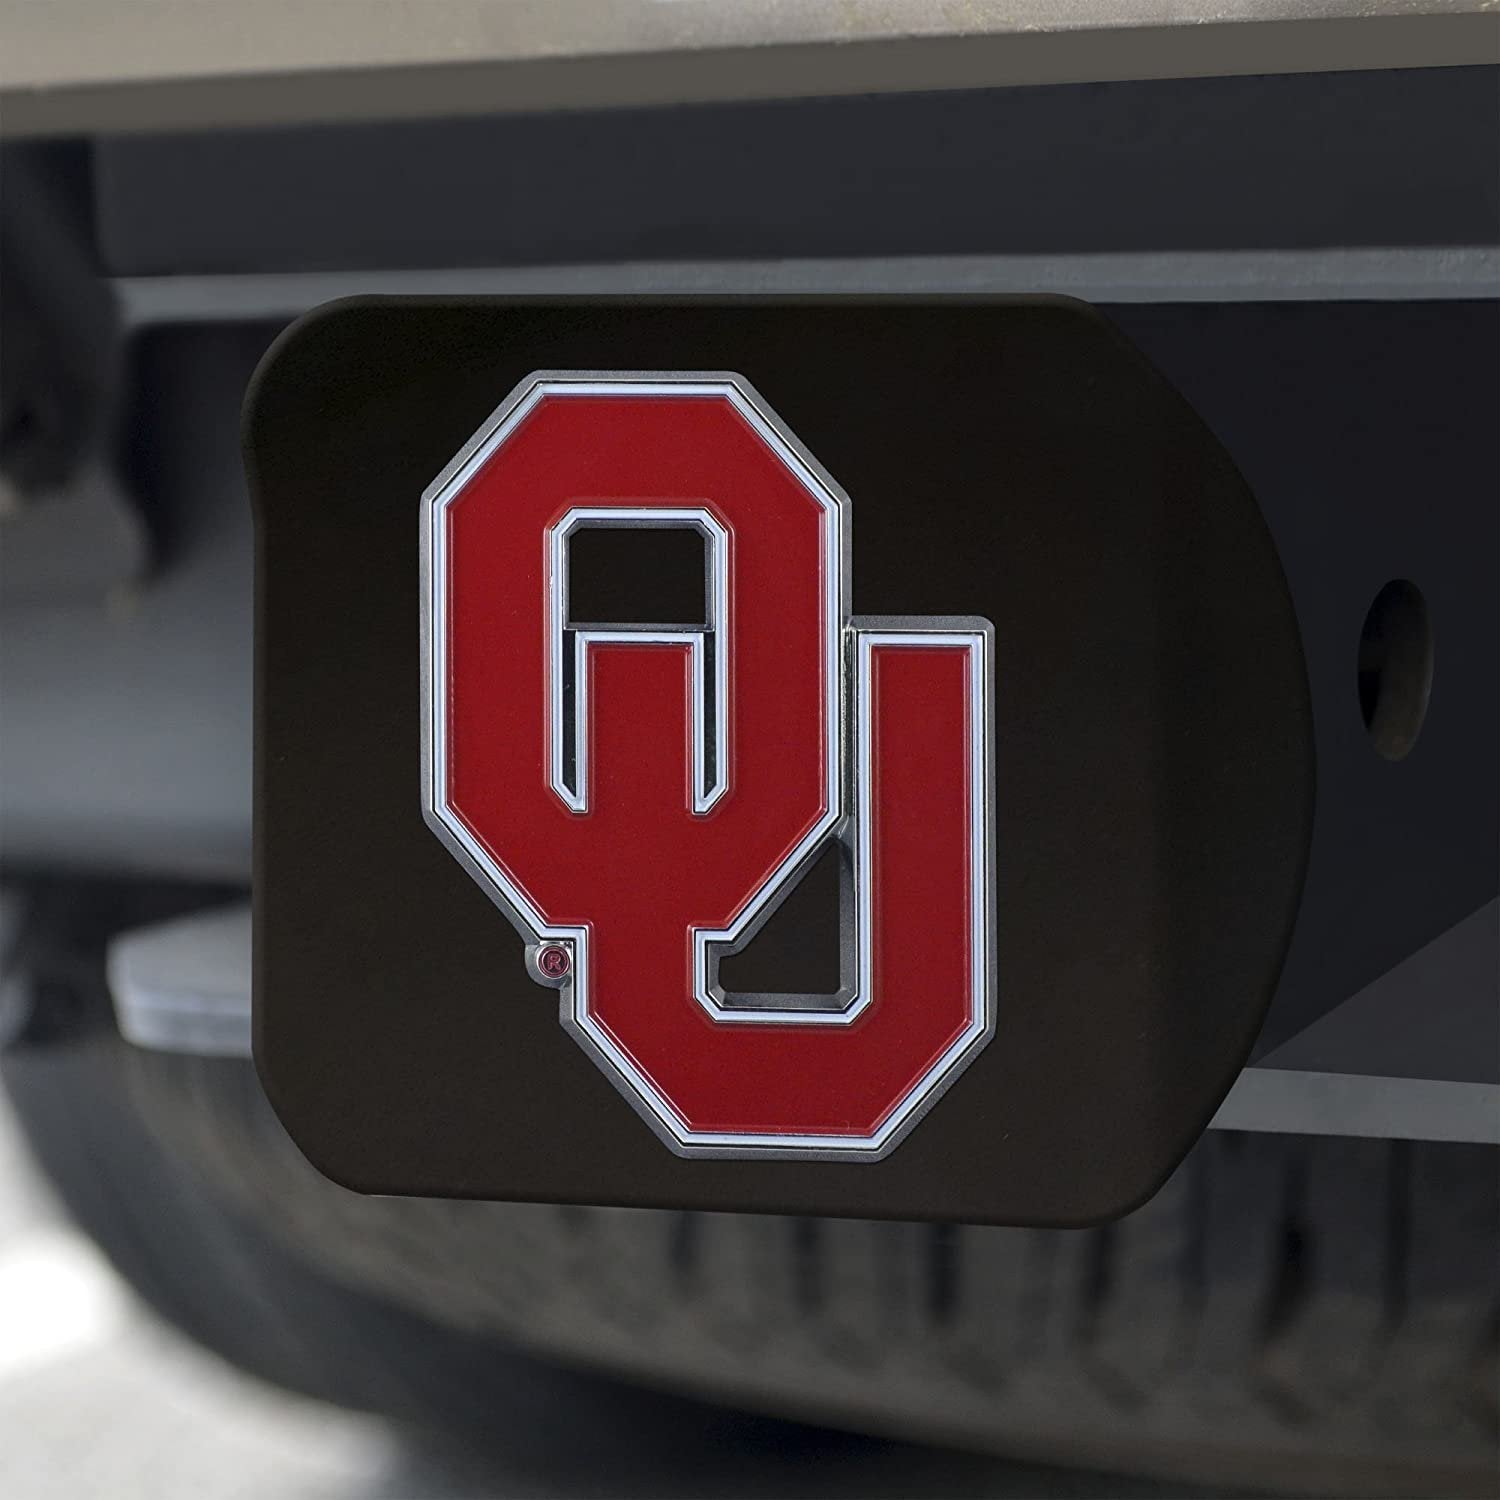 Oklahoma Sooners Solid Metal Black Hitch Cover with Color Metal Emblem 2 Inch Square Type III University of